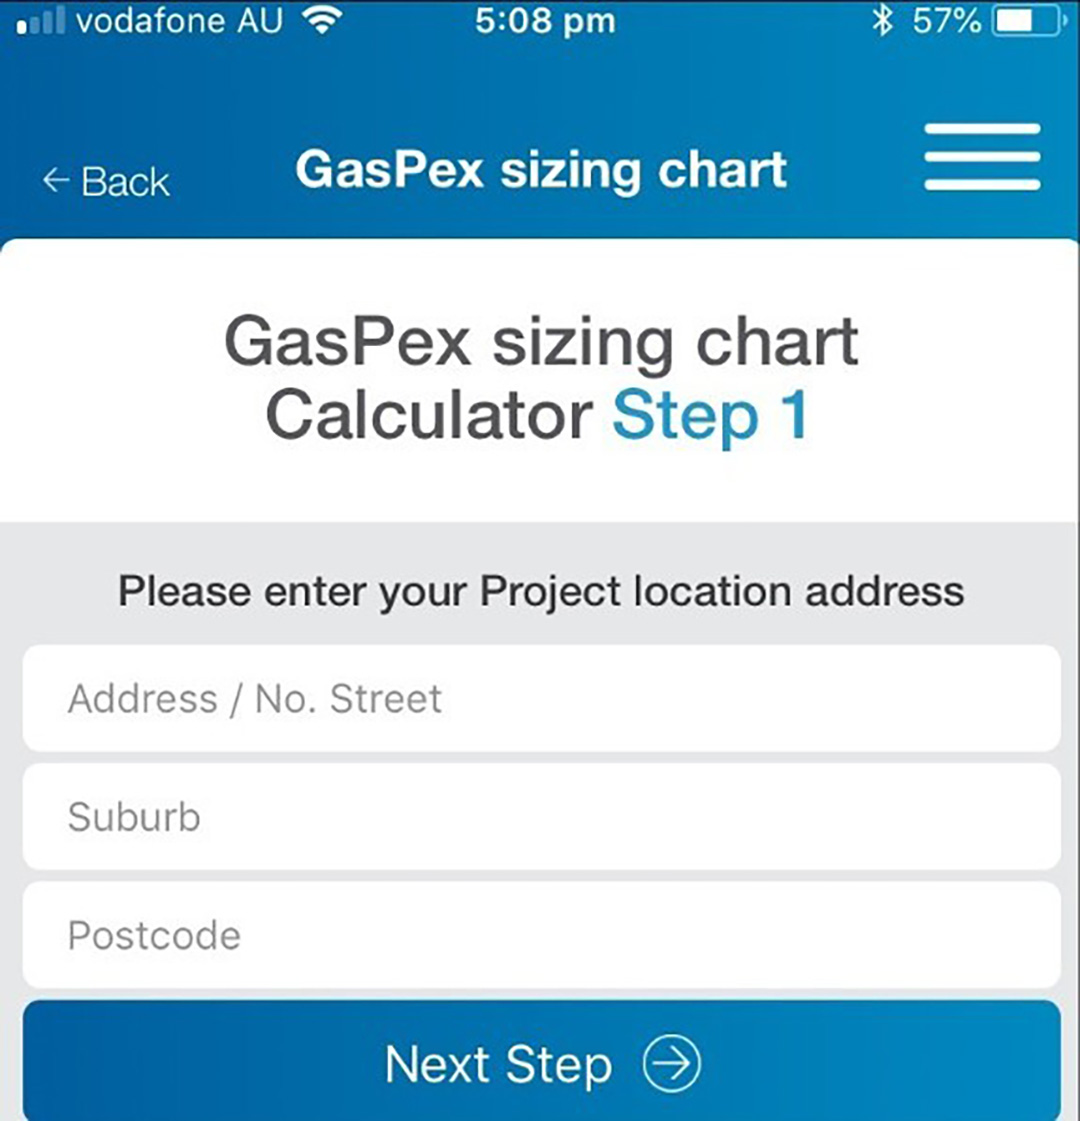 Gas Pex Sizing Made Easy with the new Automated Sizing App Archify